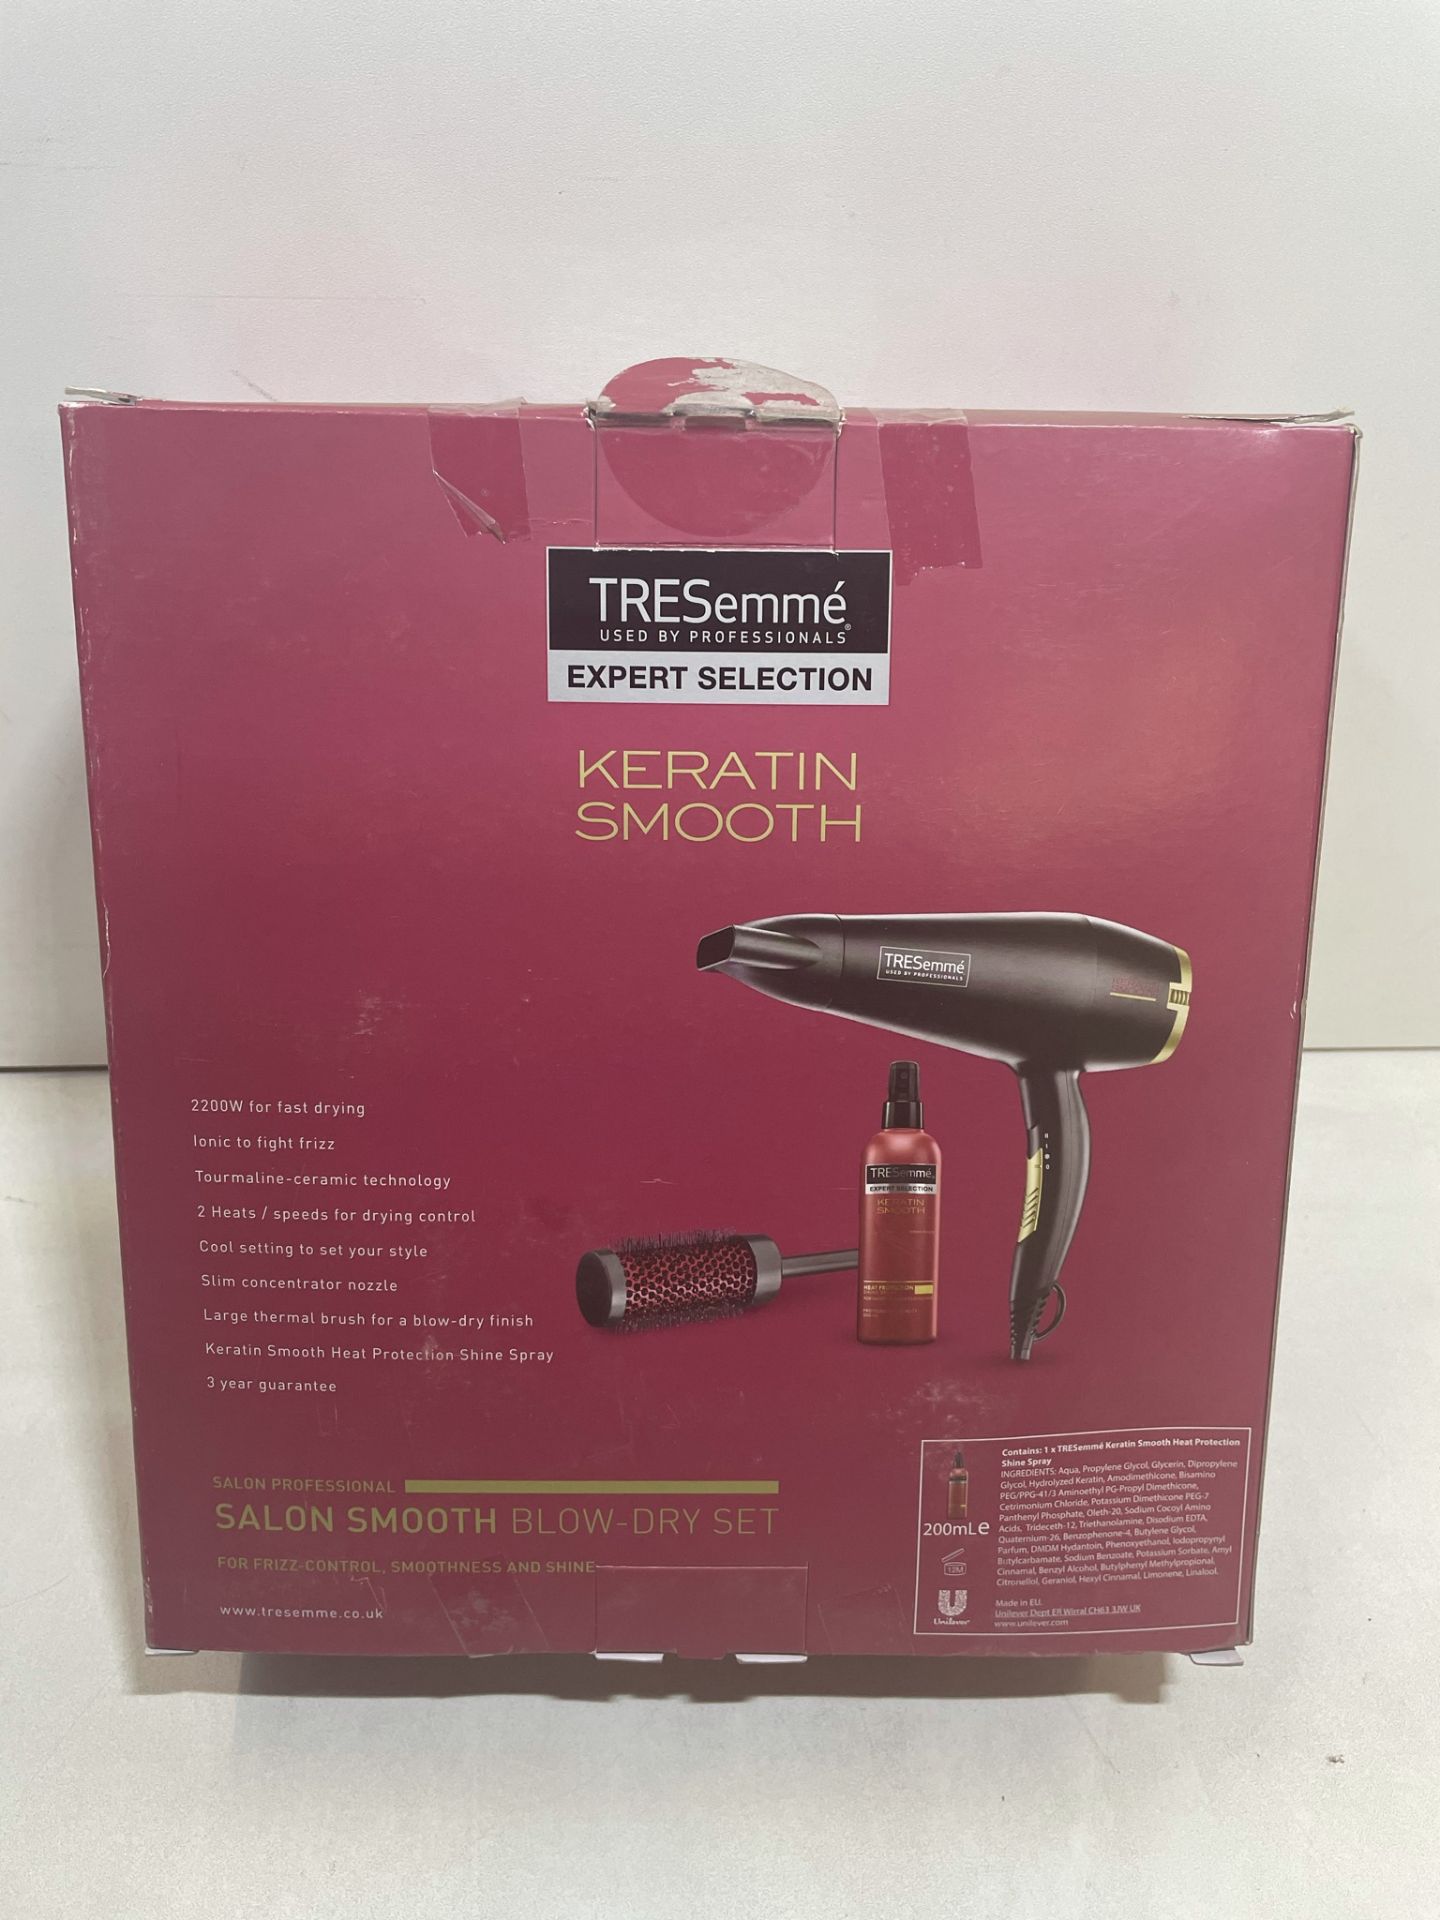 TRESemme Keratin Smooth Salon Smooth Blow Dry Set - Image 2 of 2